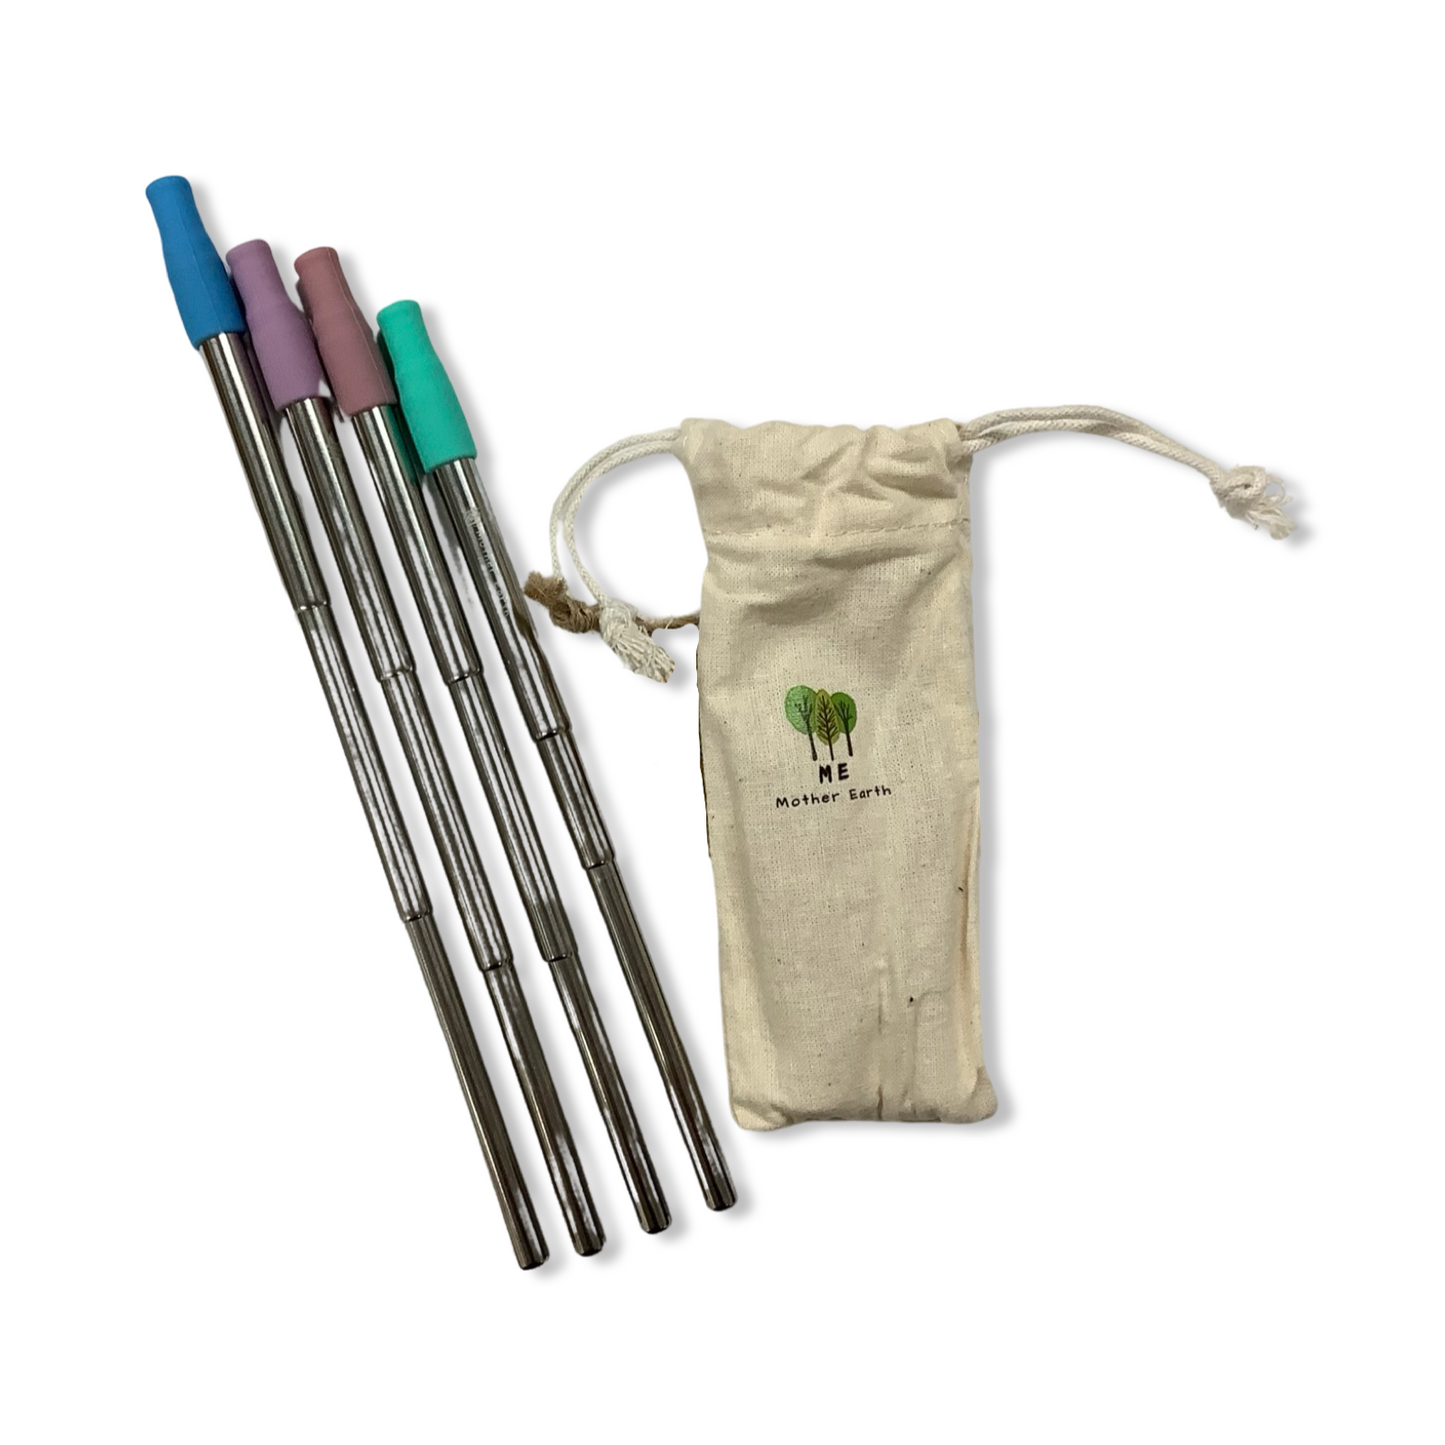 Collapsible Straw Set - ME Mother Earth